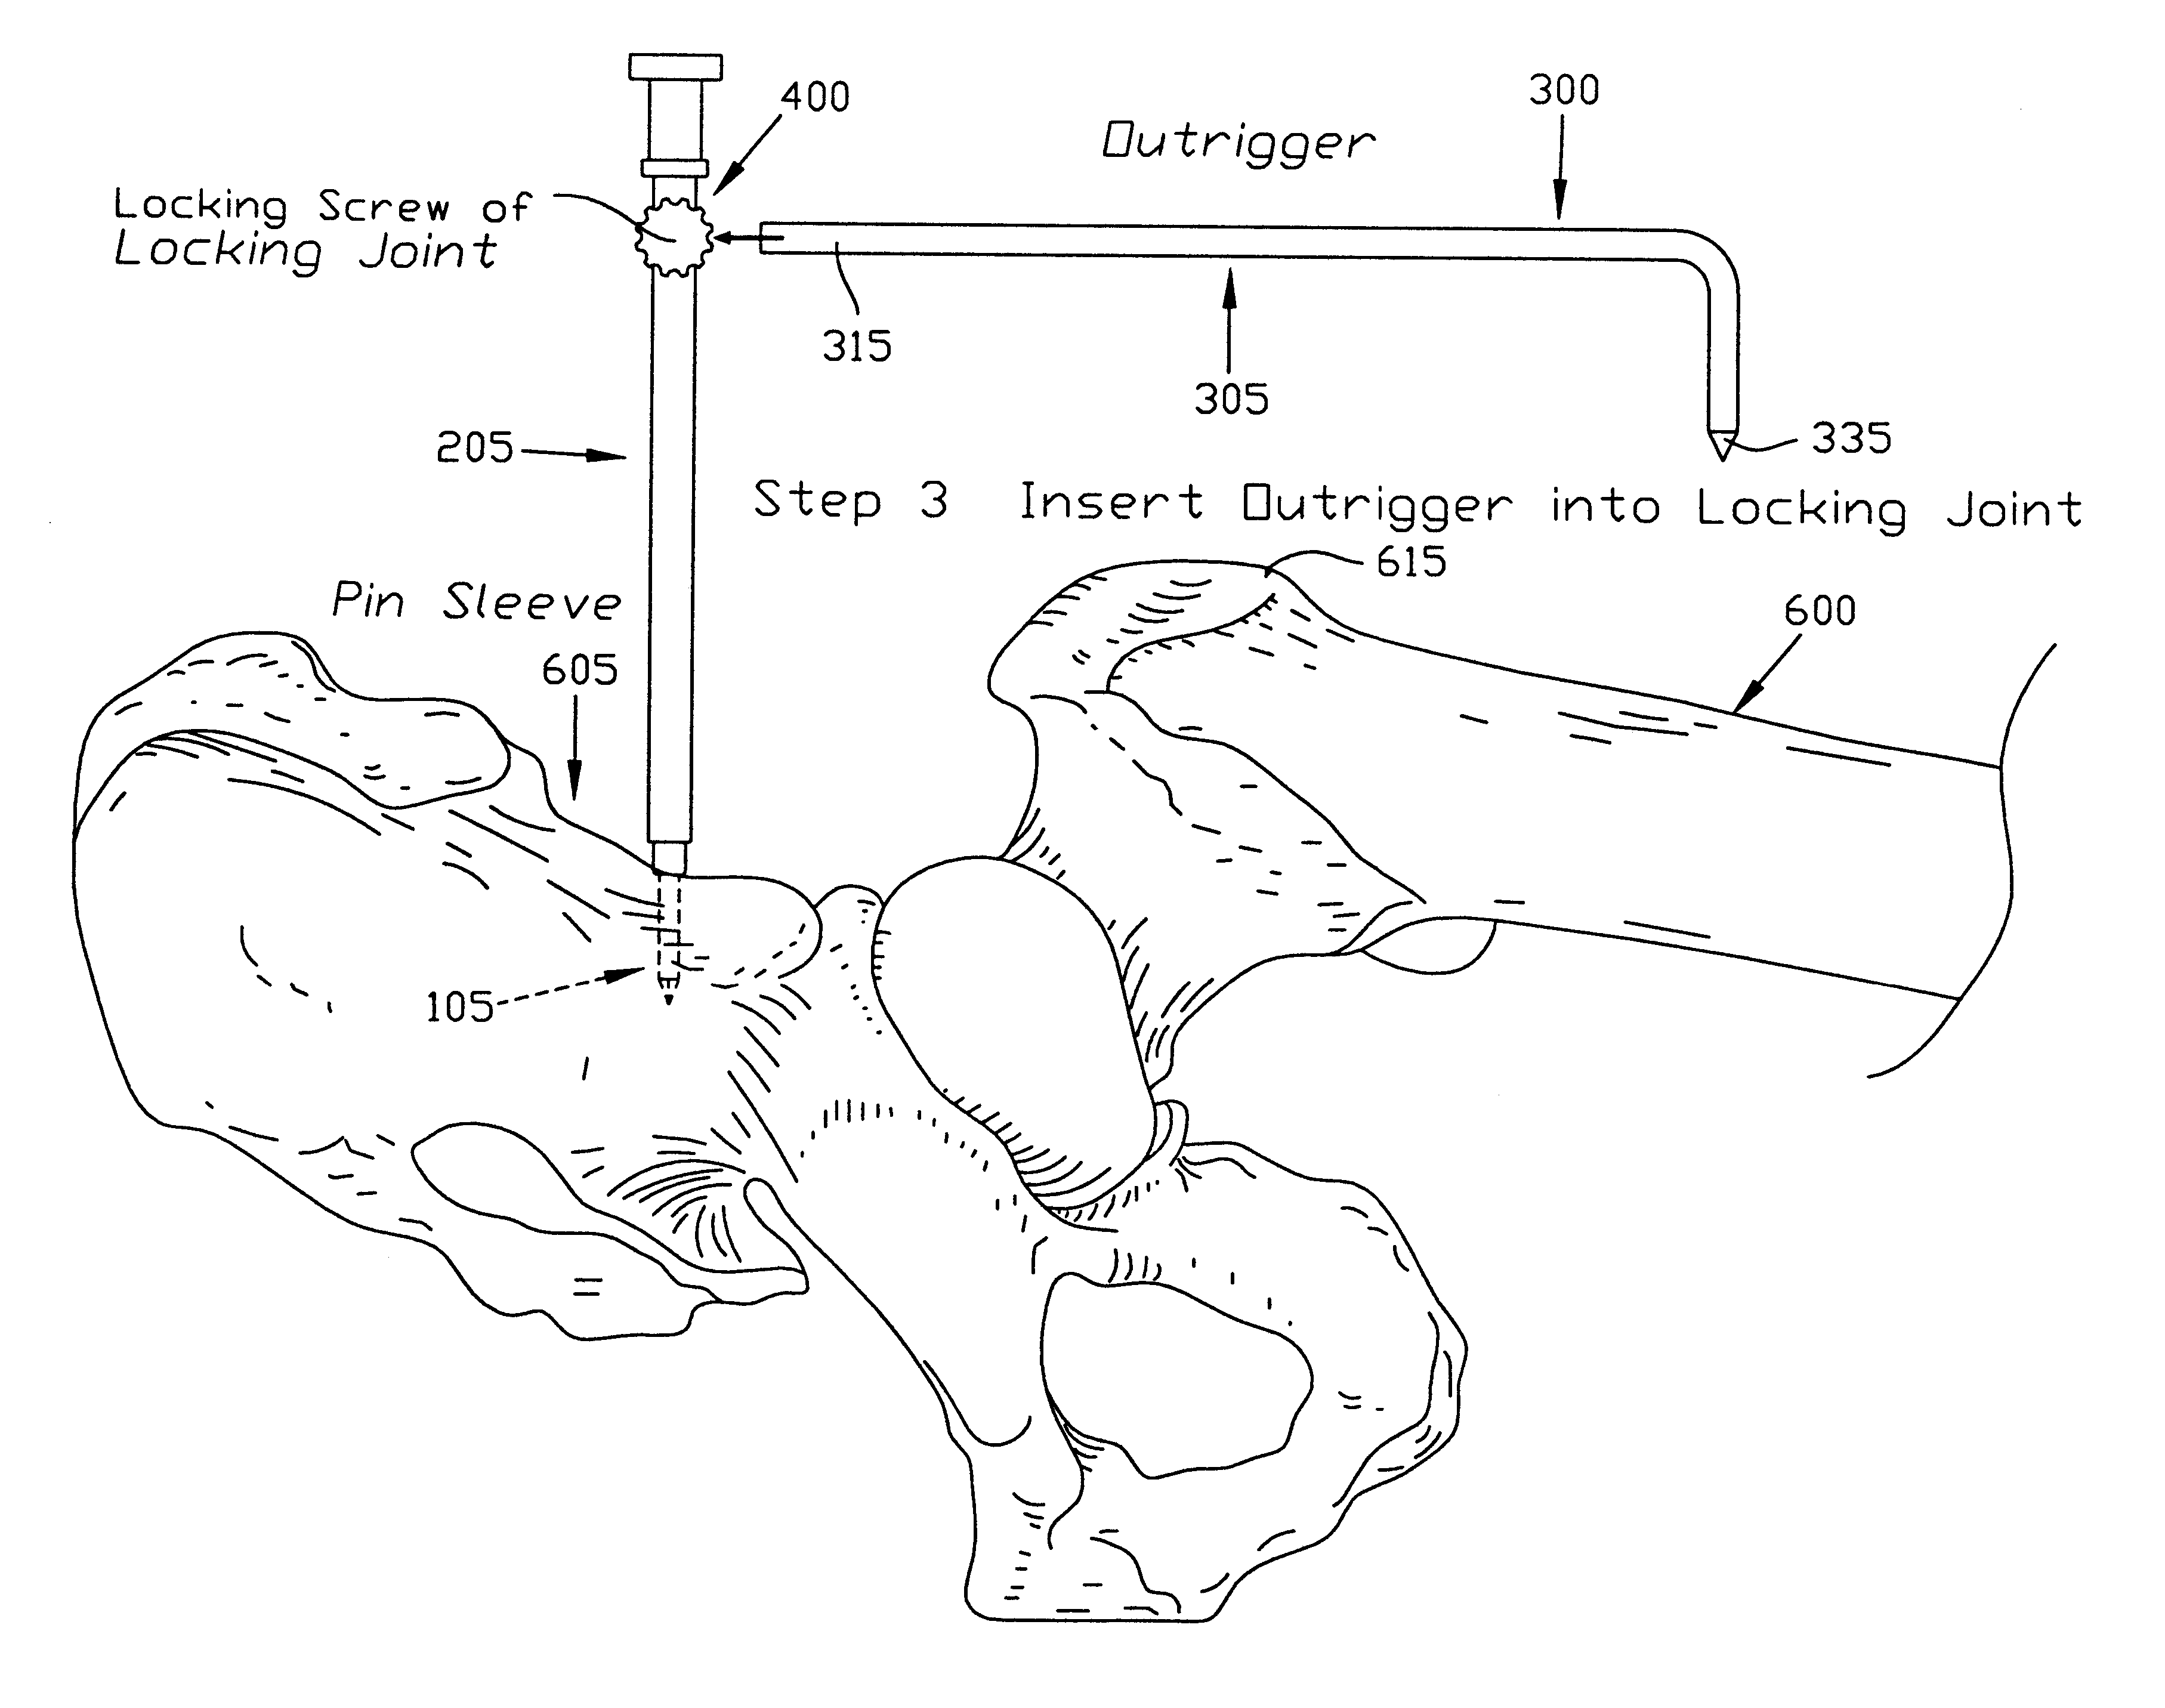 Apparatus and method for determining the relative position of bones during surgery